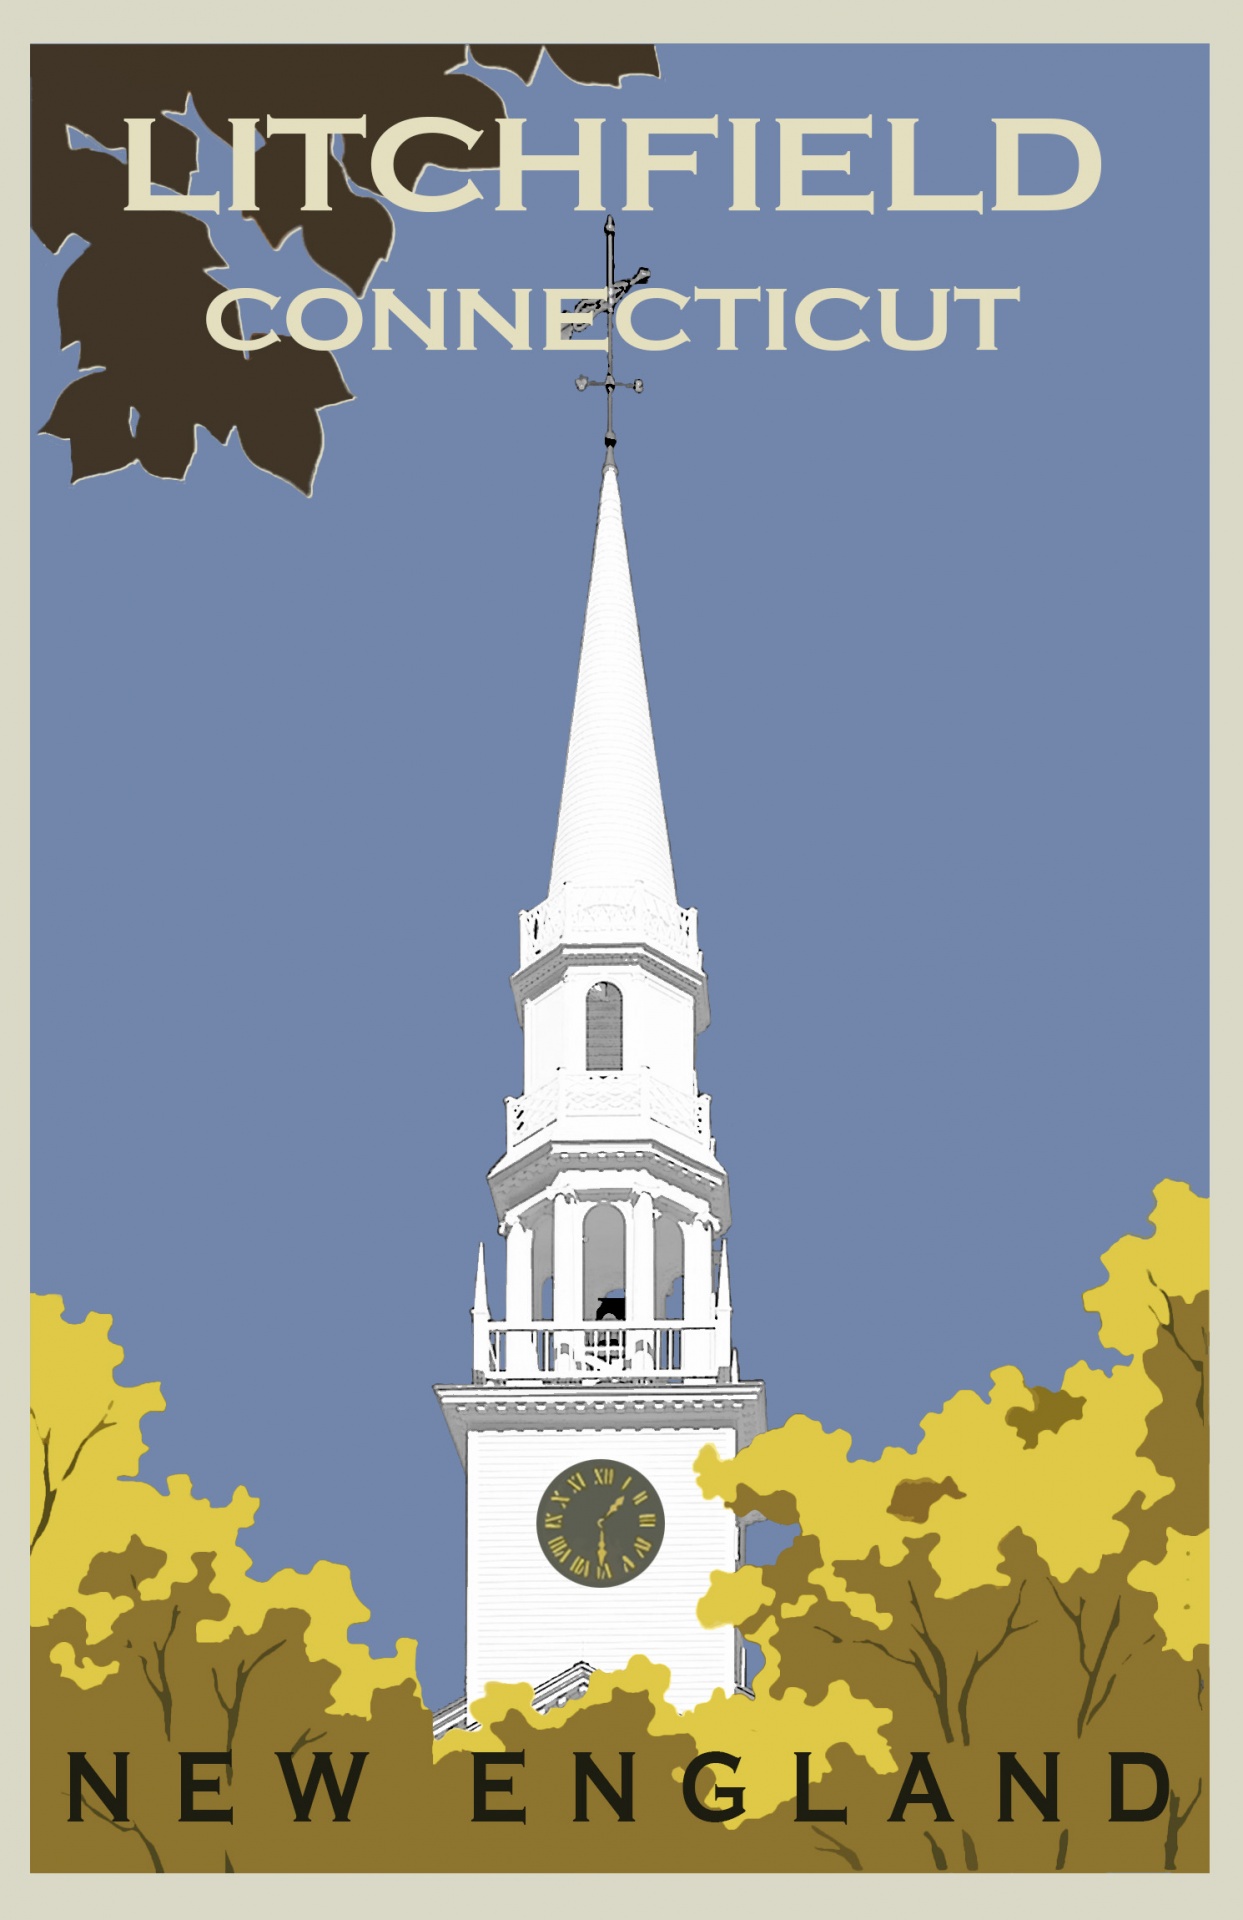 Modern but with a retro vintage feel travel poster for Litchfield, Connecticut, America in the fall with clock tower of famous little white church